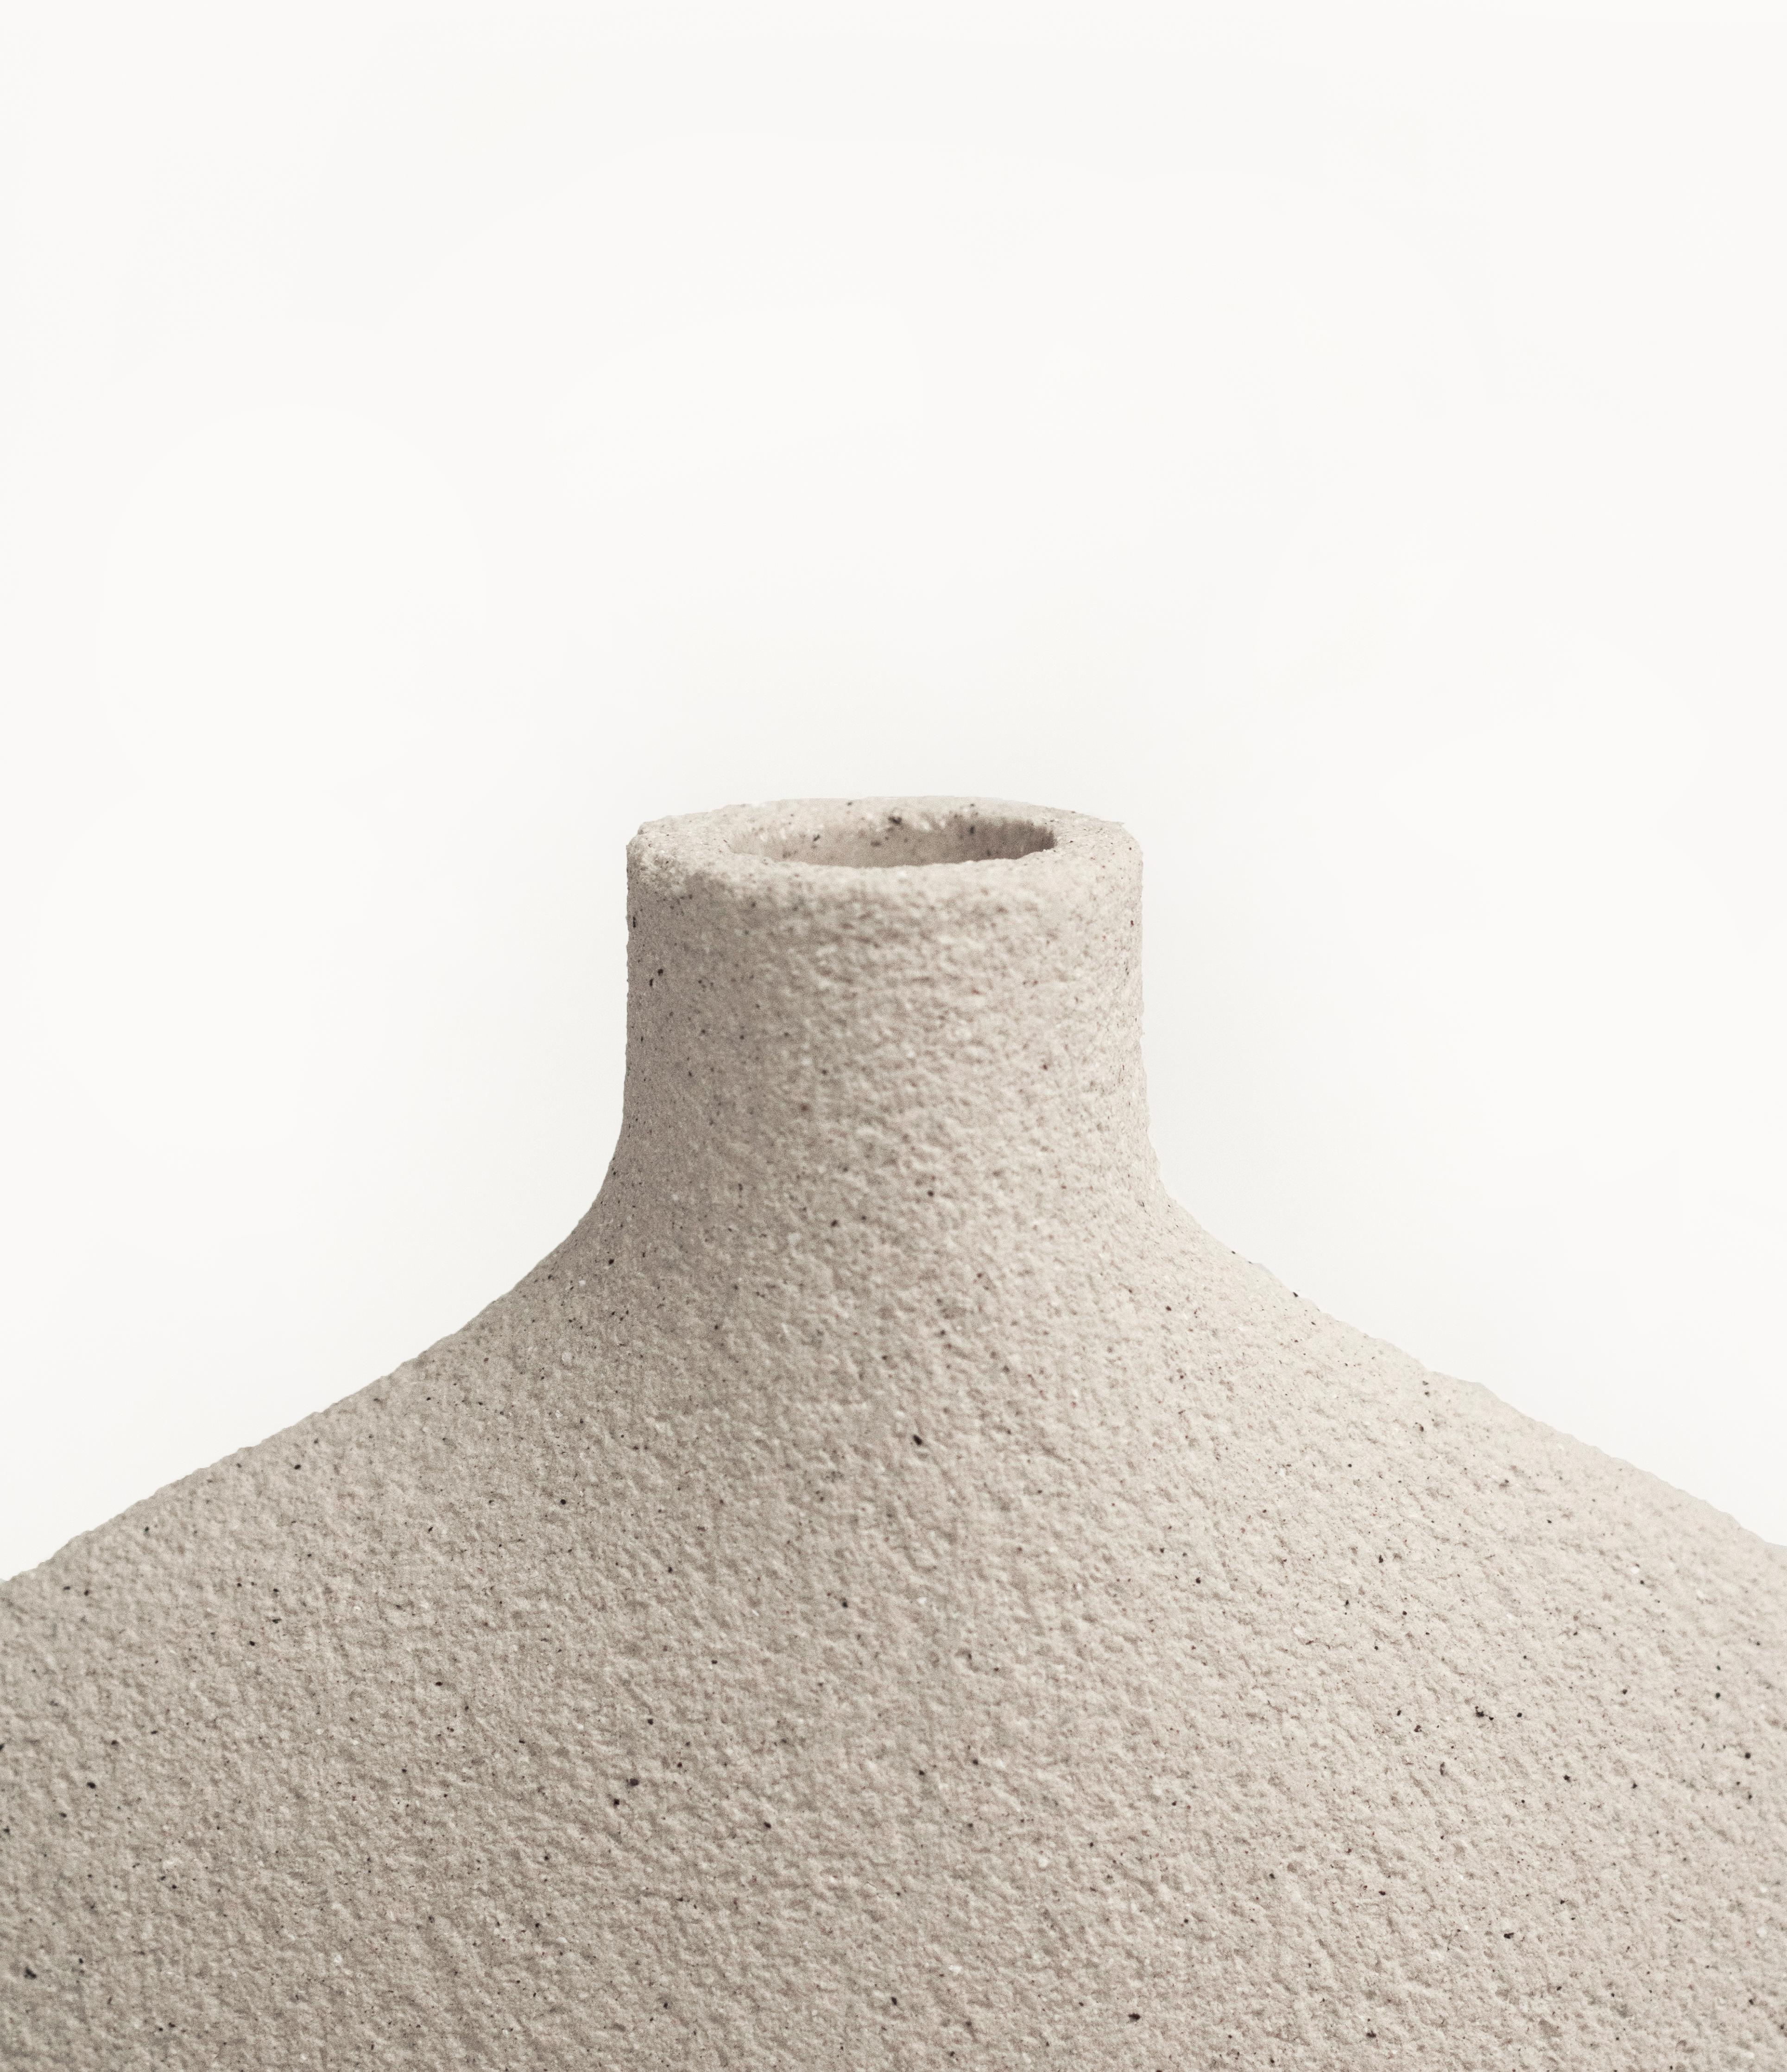 Minimalist 21st Century Goutte Vase in White Ceramic, Hand-Crafted in France For Sale